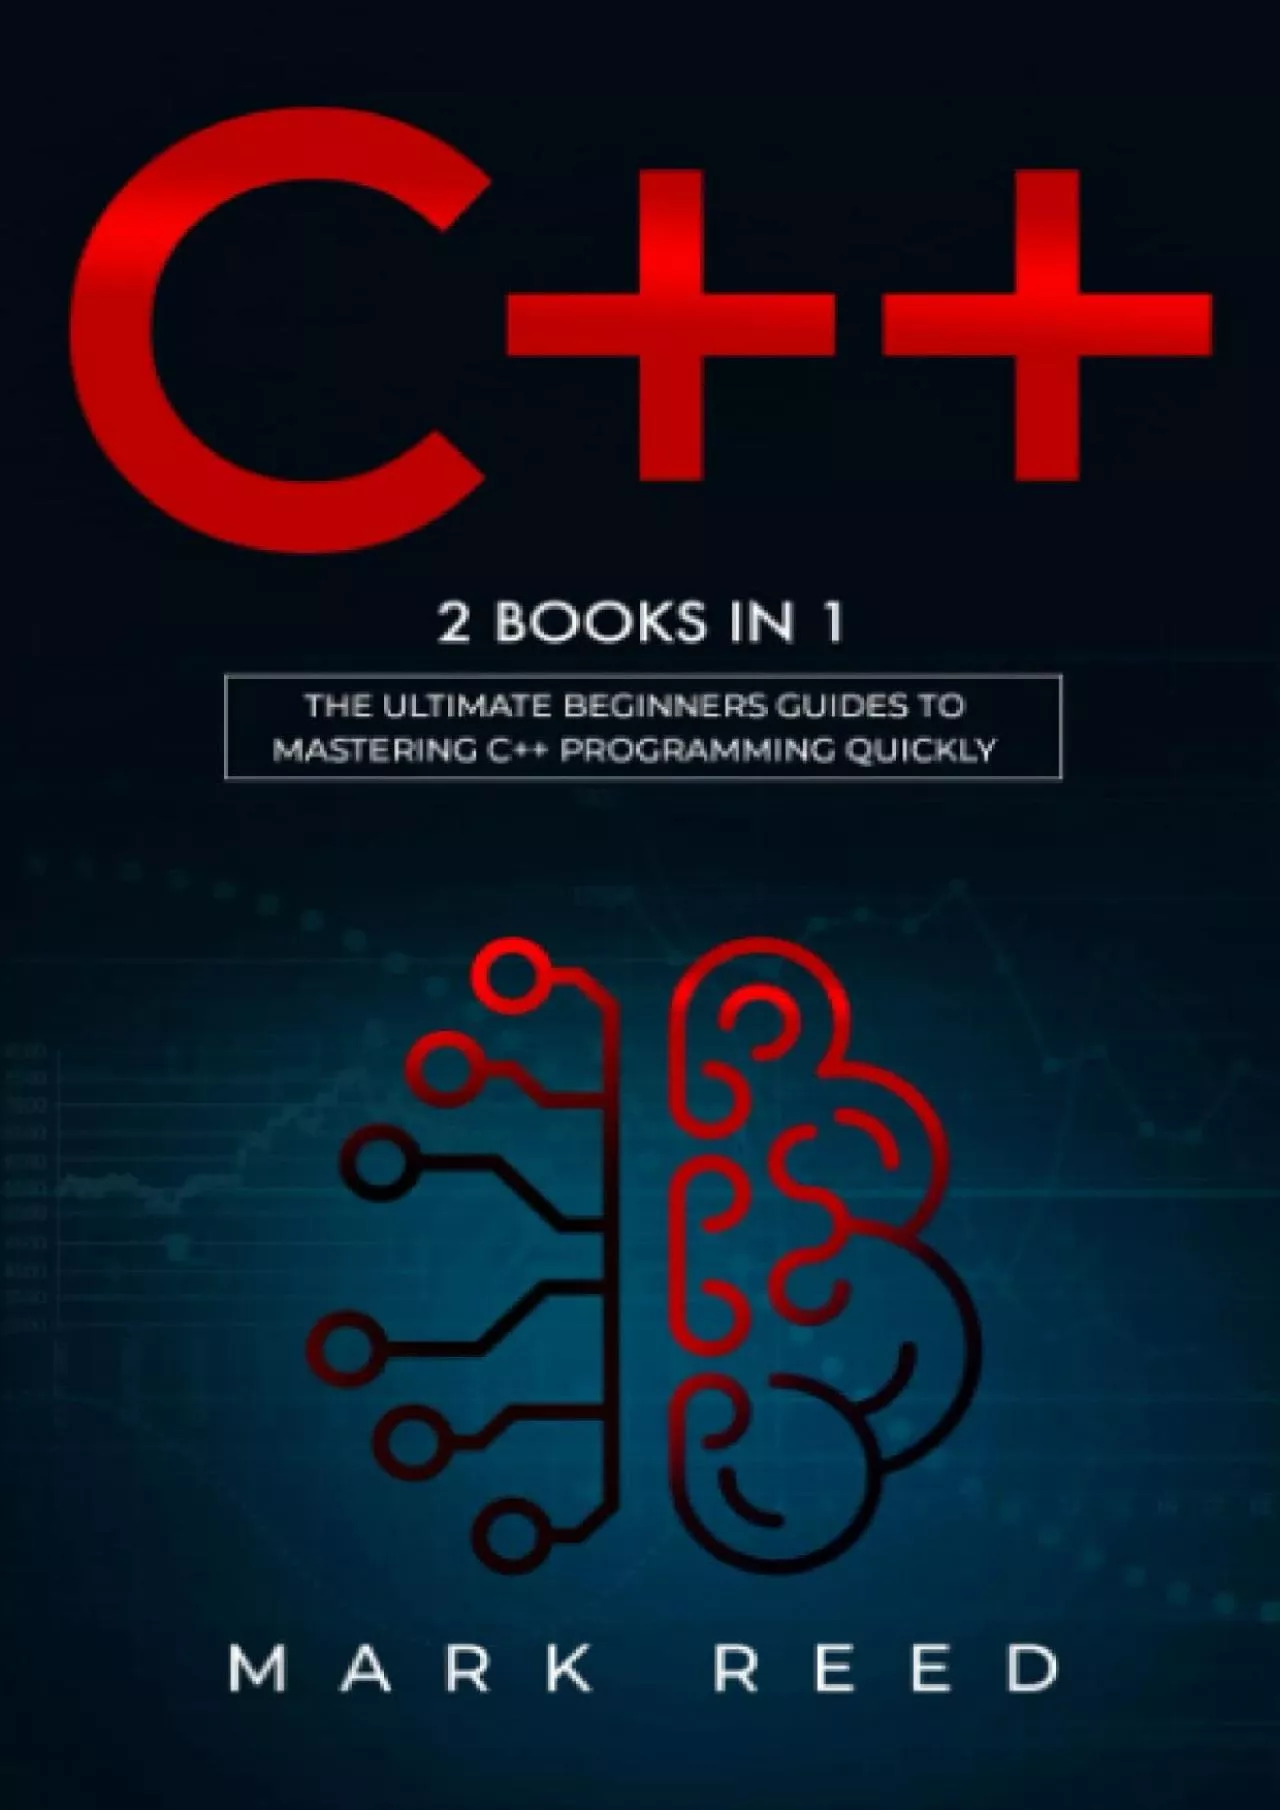 [FREE]-C++: 2 BOOKS IN 1 - The Ultimate Beginners Guide To Mastering C++ Programming 